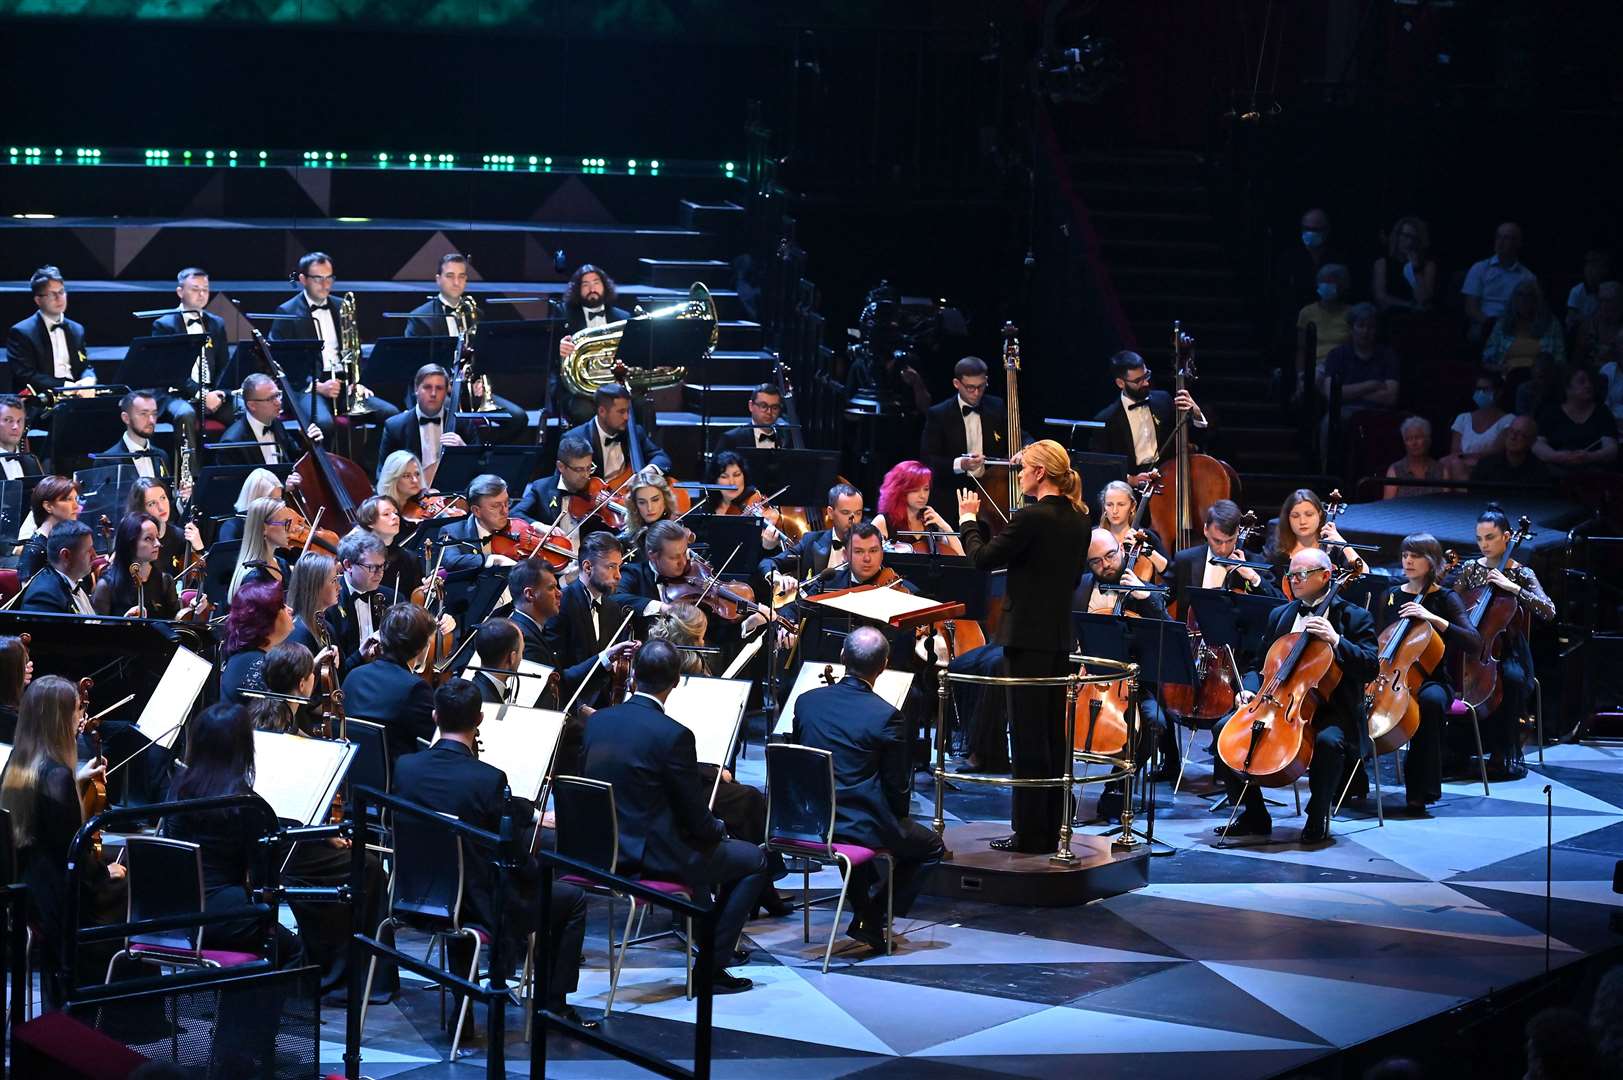 The BBC Singers will appear at the Proms this year (Mark Allan/BBC/PA)